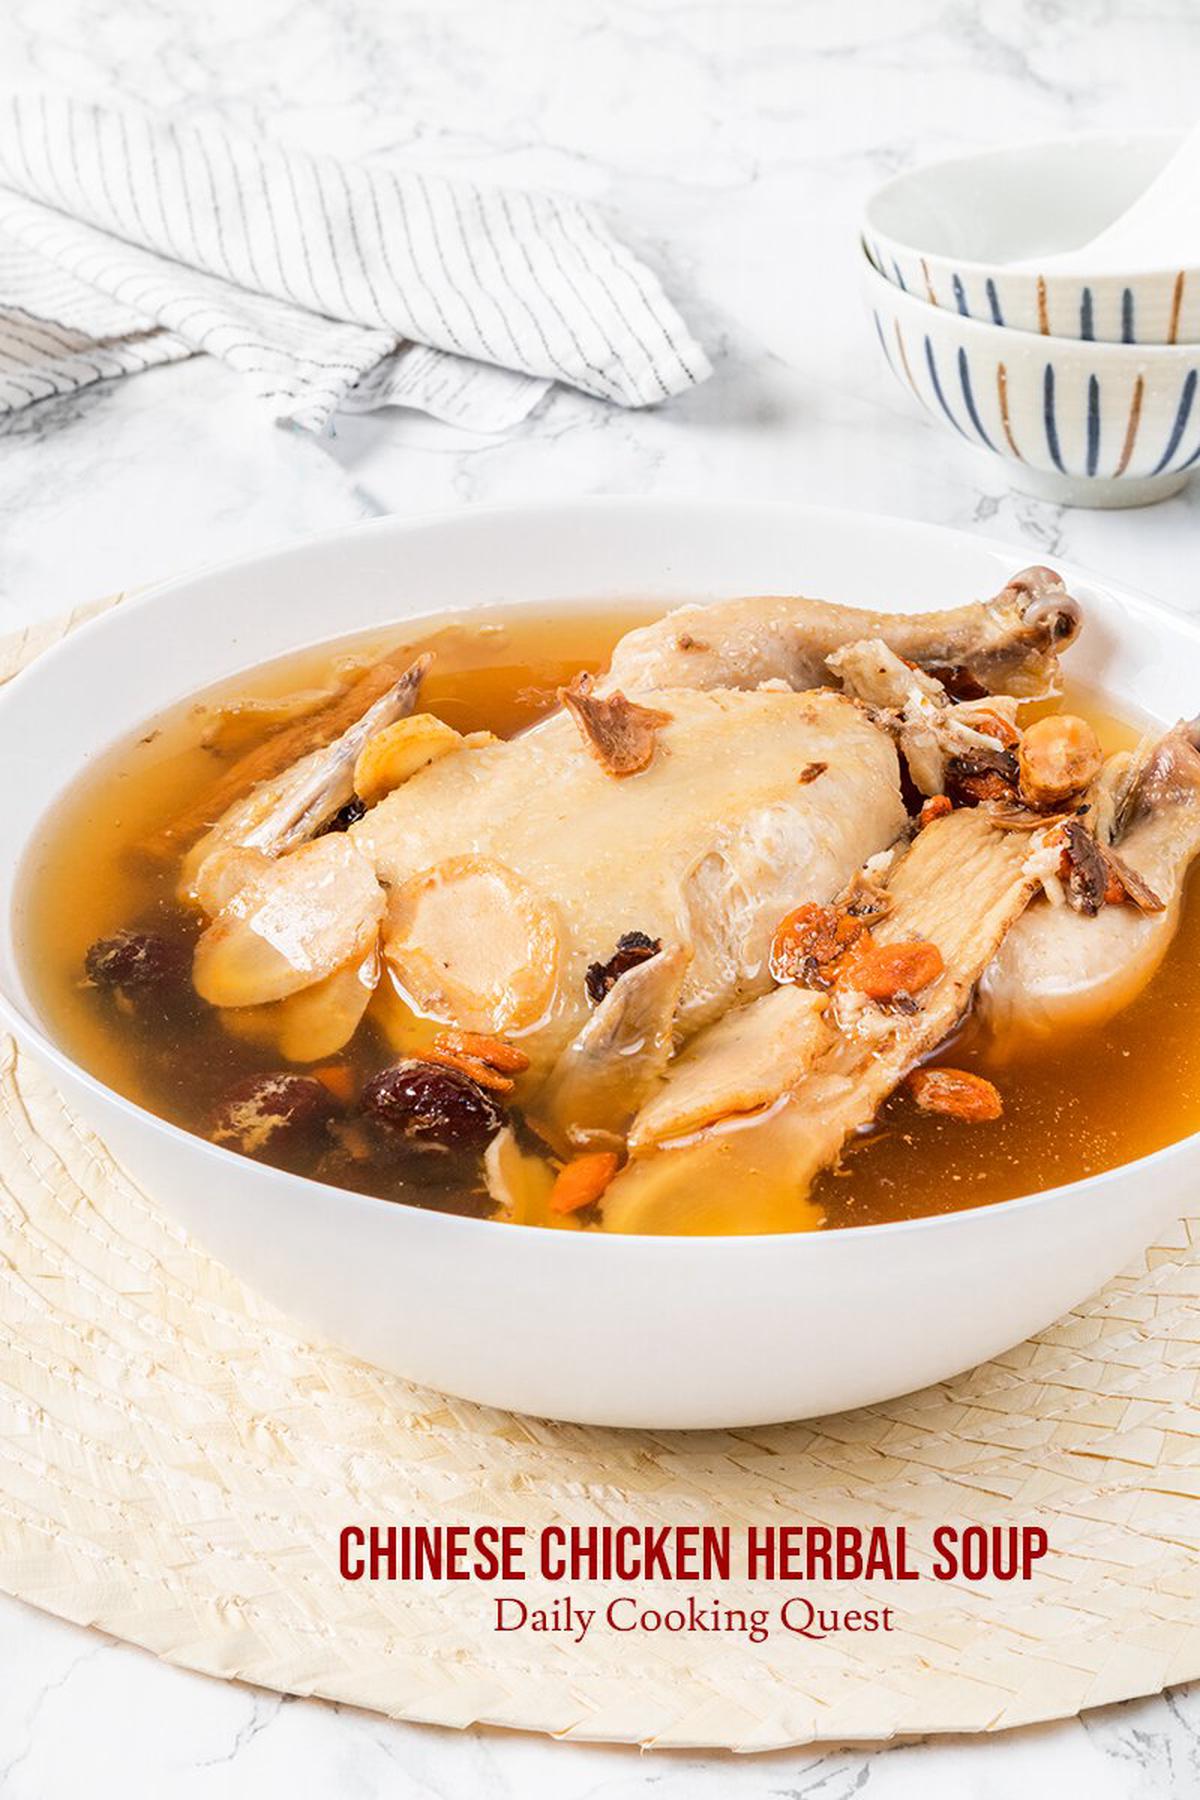 Always serve Chinese chicken herbal soup hot.